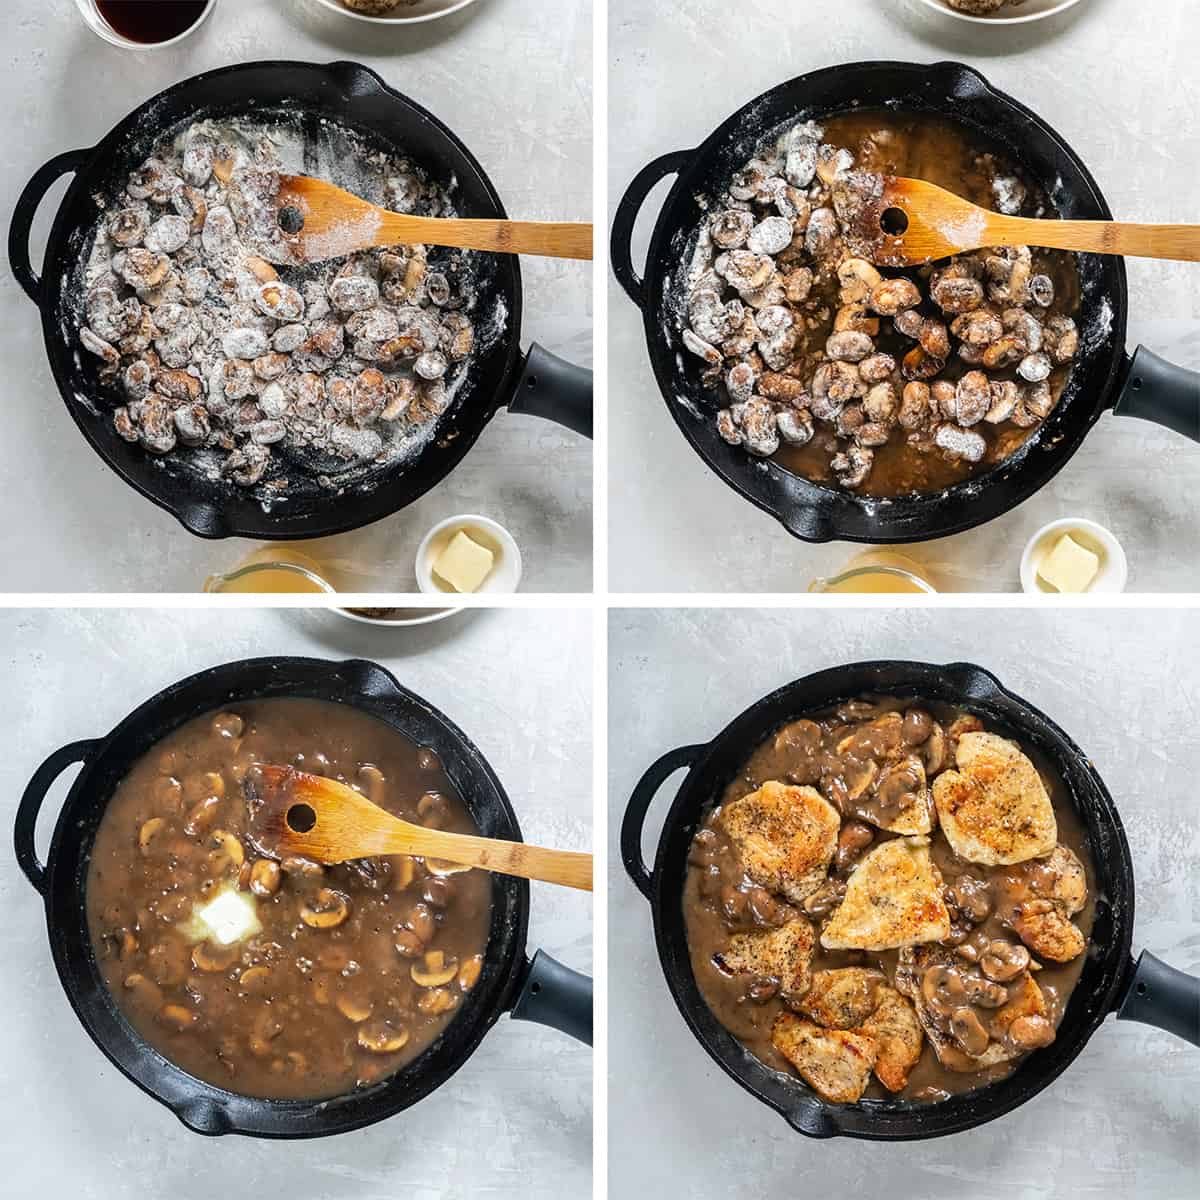 Four images of mushrooms cooking in a skillet with flour, marsala, broth and cooked chicken is added.